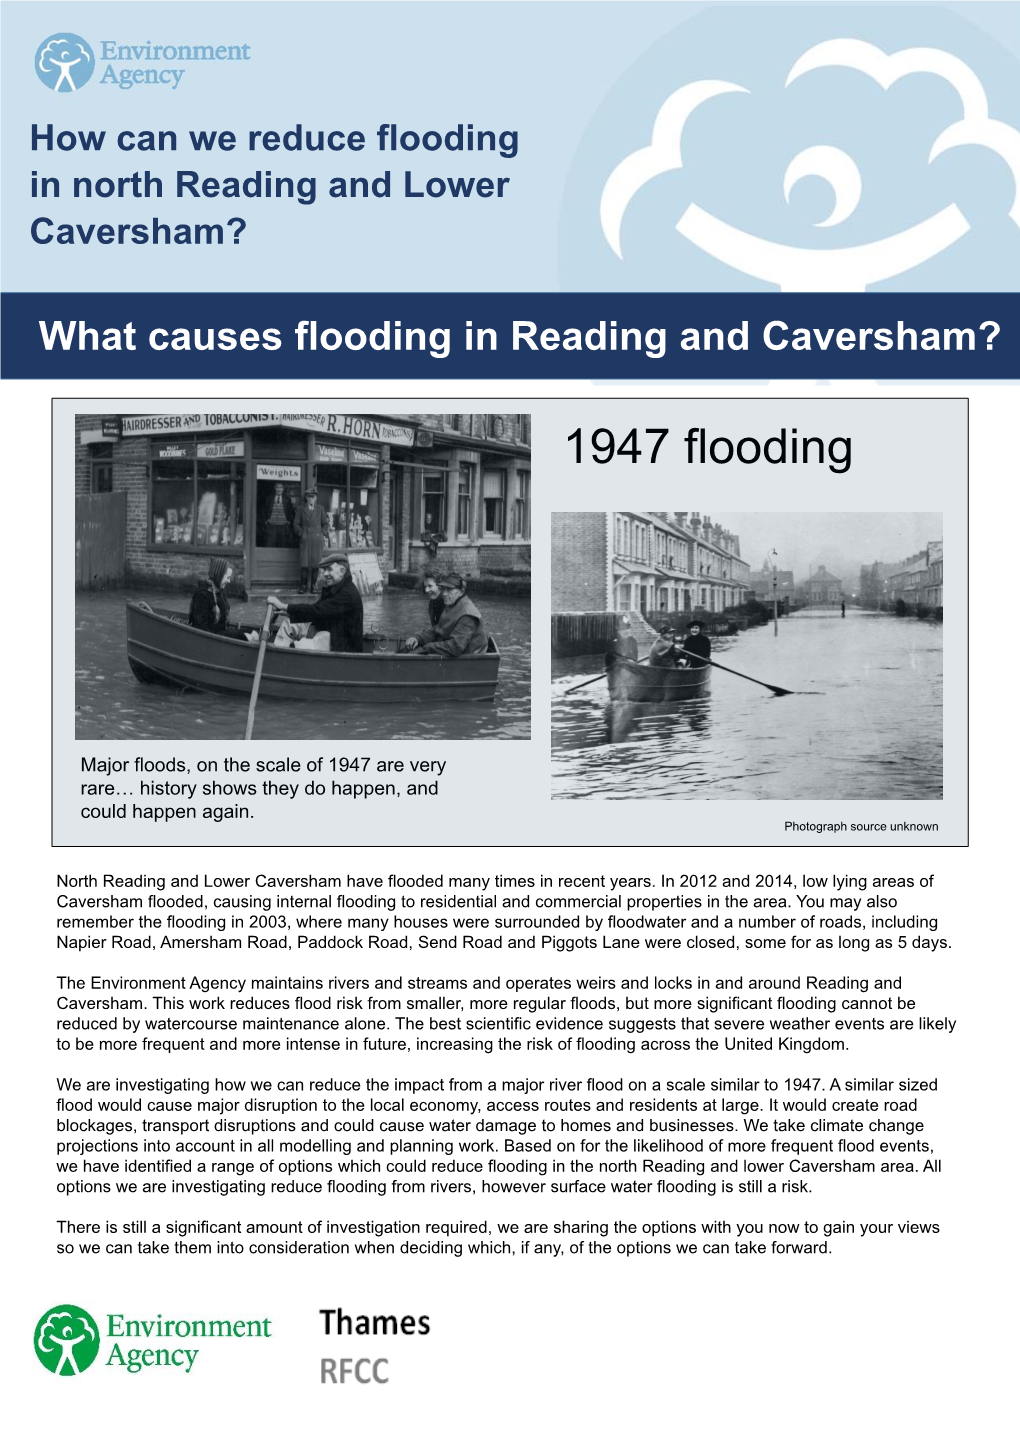 What Causes Flooding in Reading and Caversham?